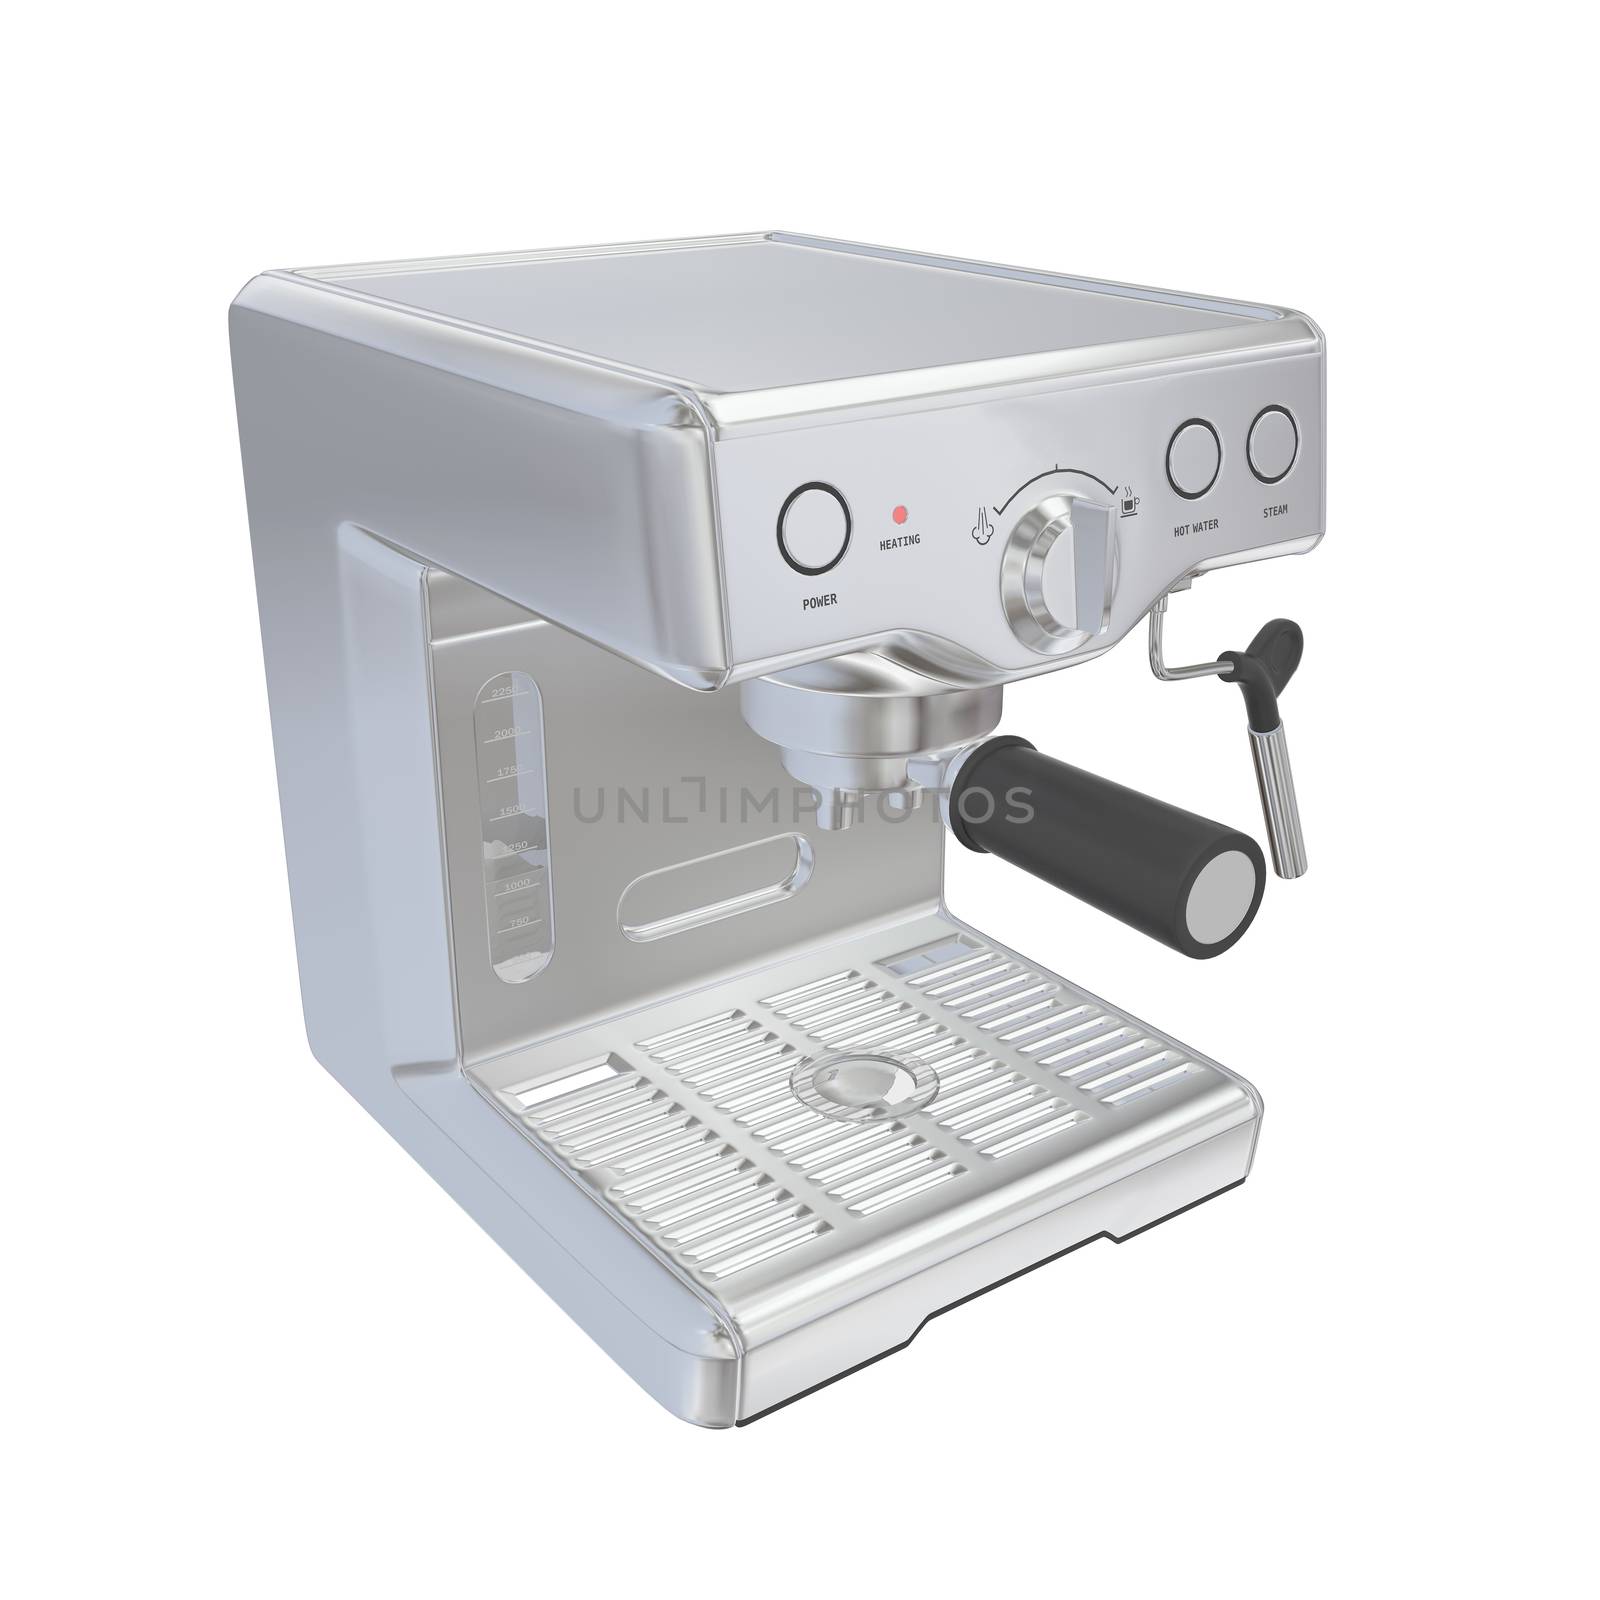 Stainless steel espresso coffee machine, 3D illustration, isolated against a white background